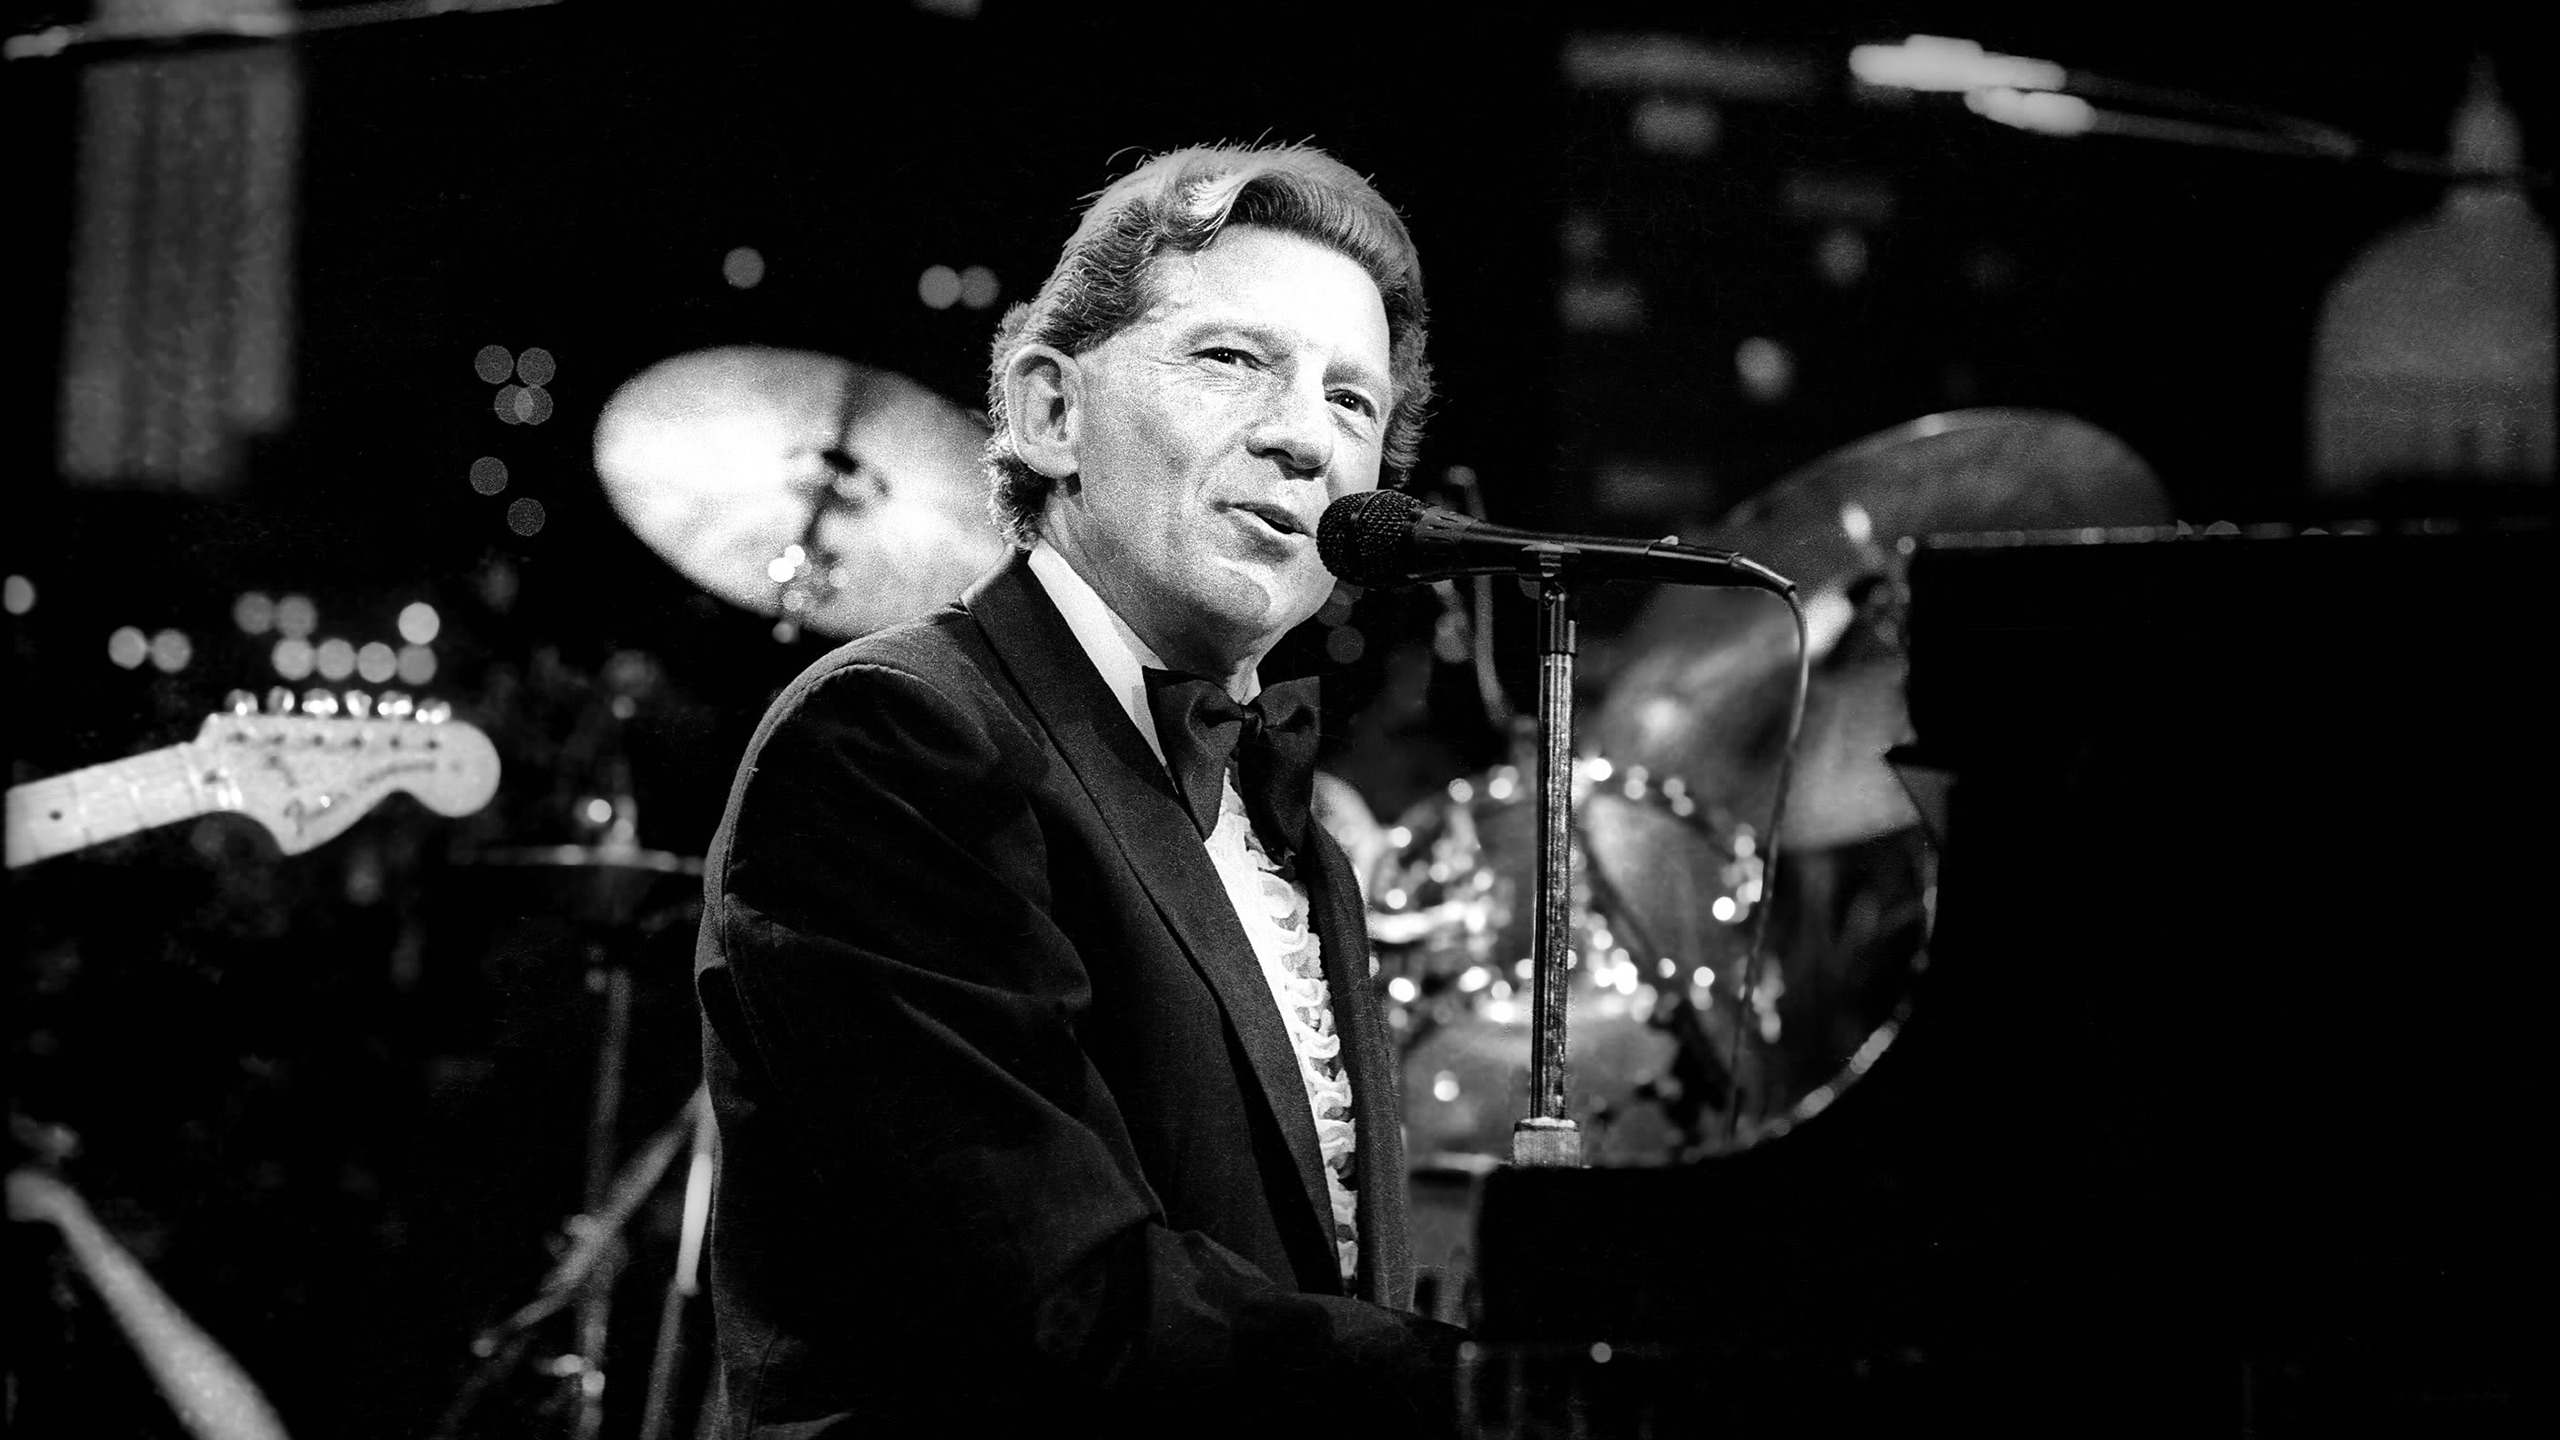 Jerry Lee Lewis for 2560x1440 HDTV resolution